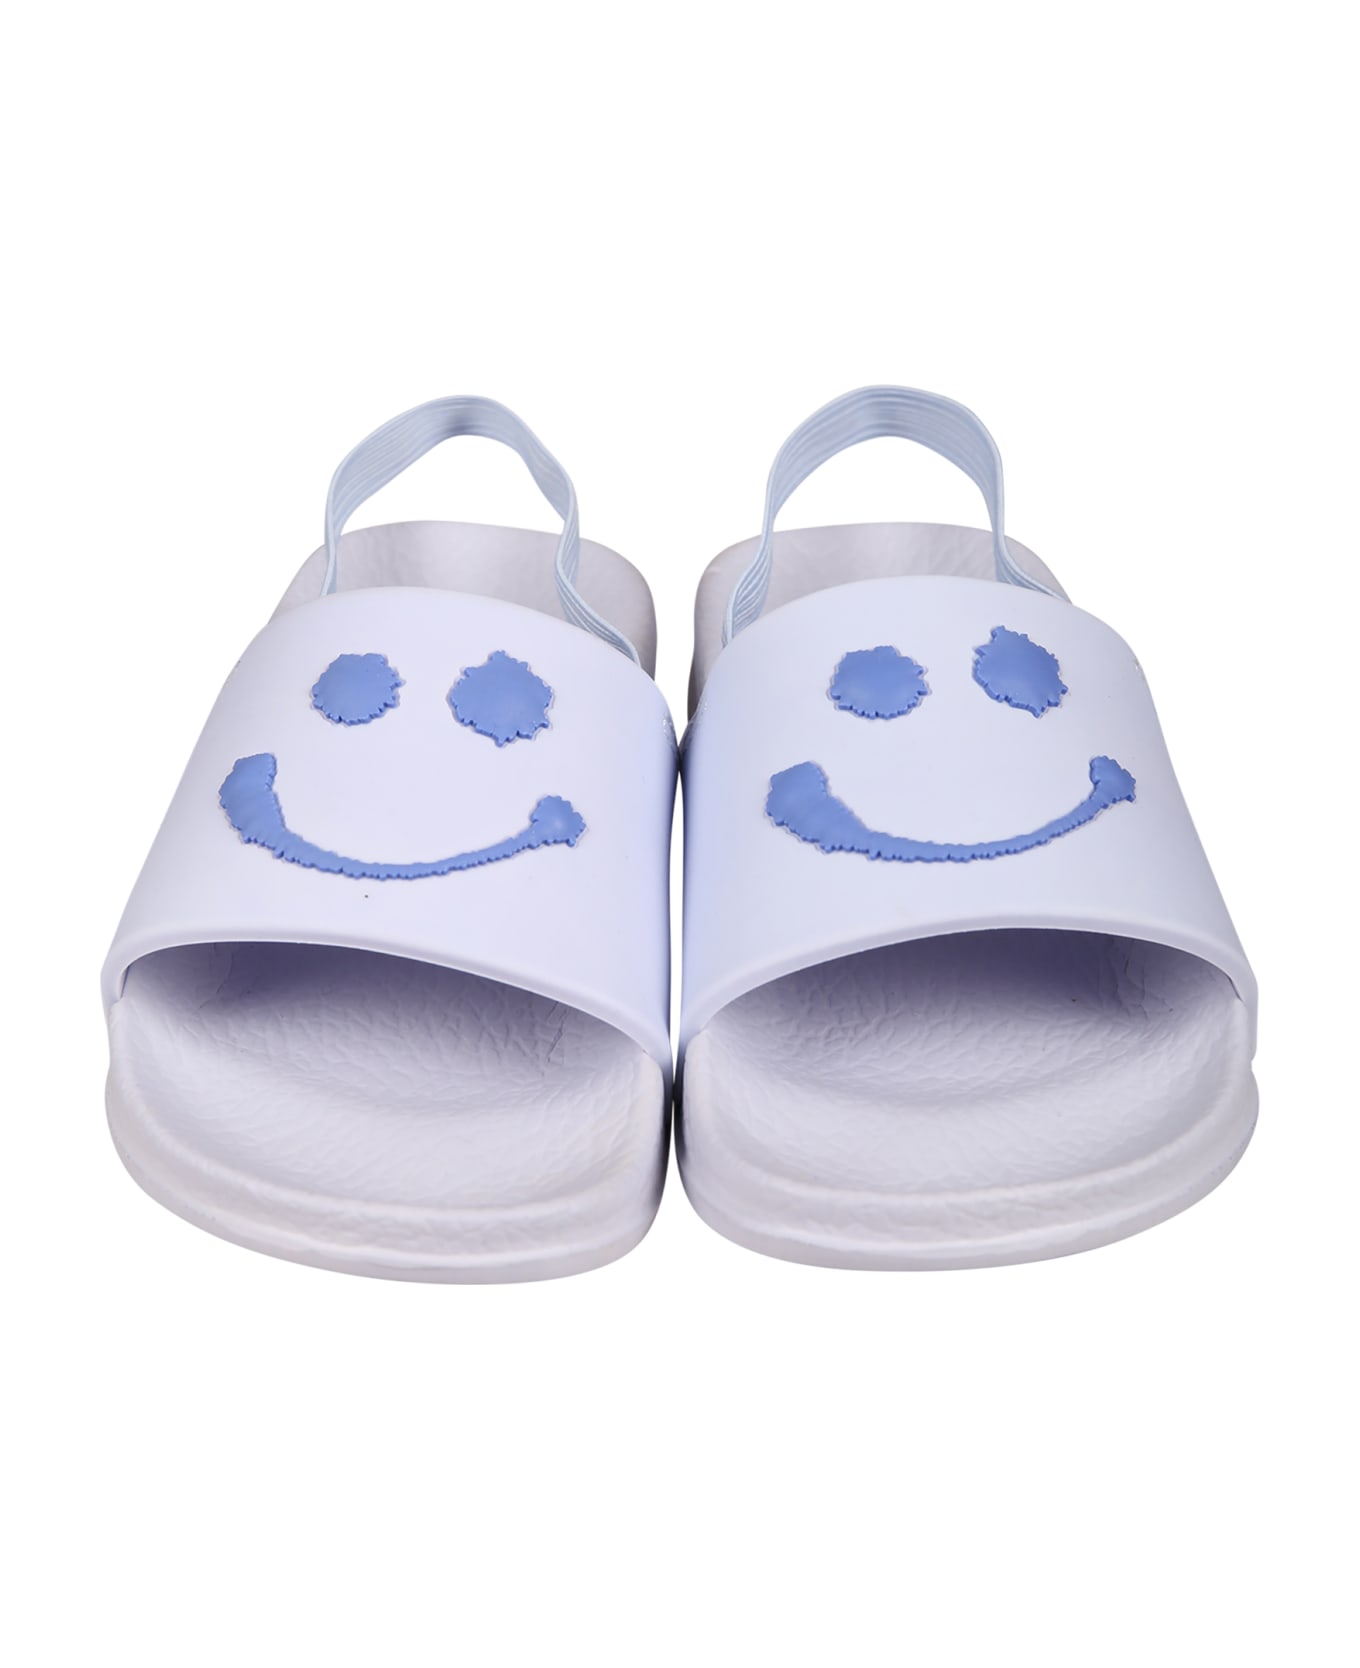 Molo Light Blue Slippers For Babykids With Smiley - Light Blue